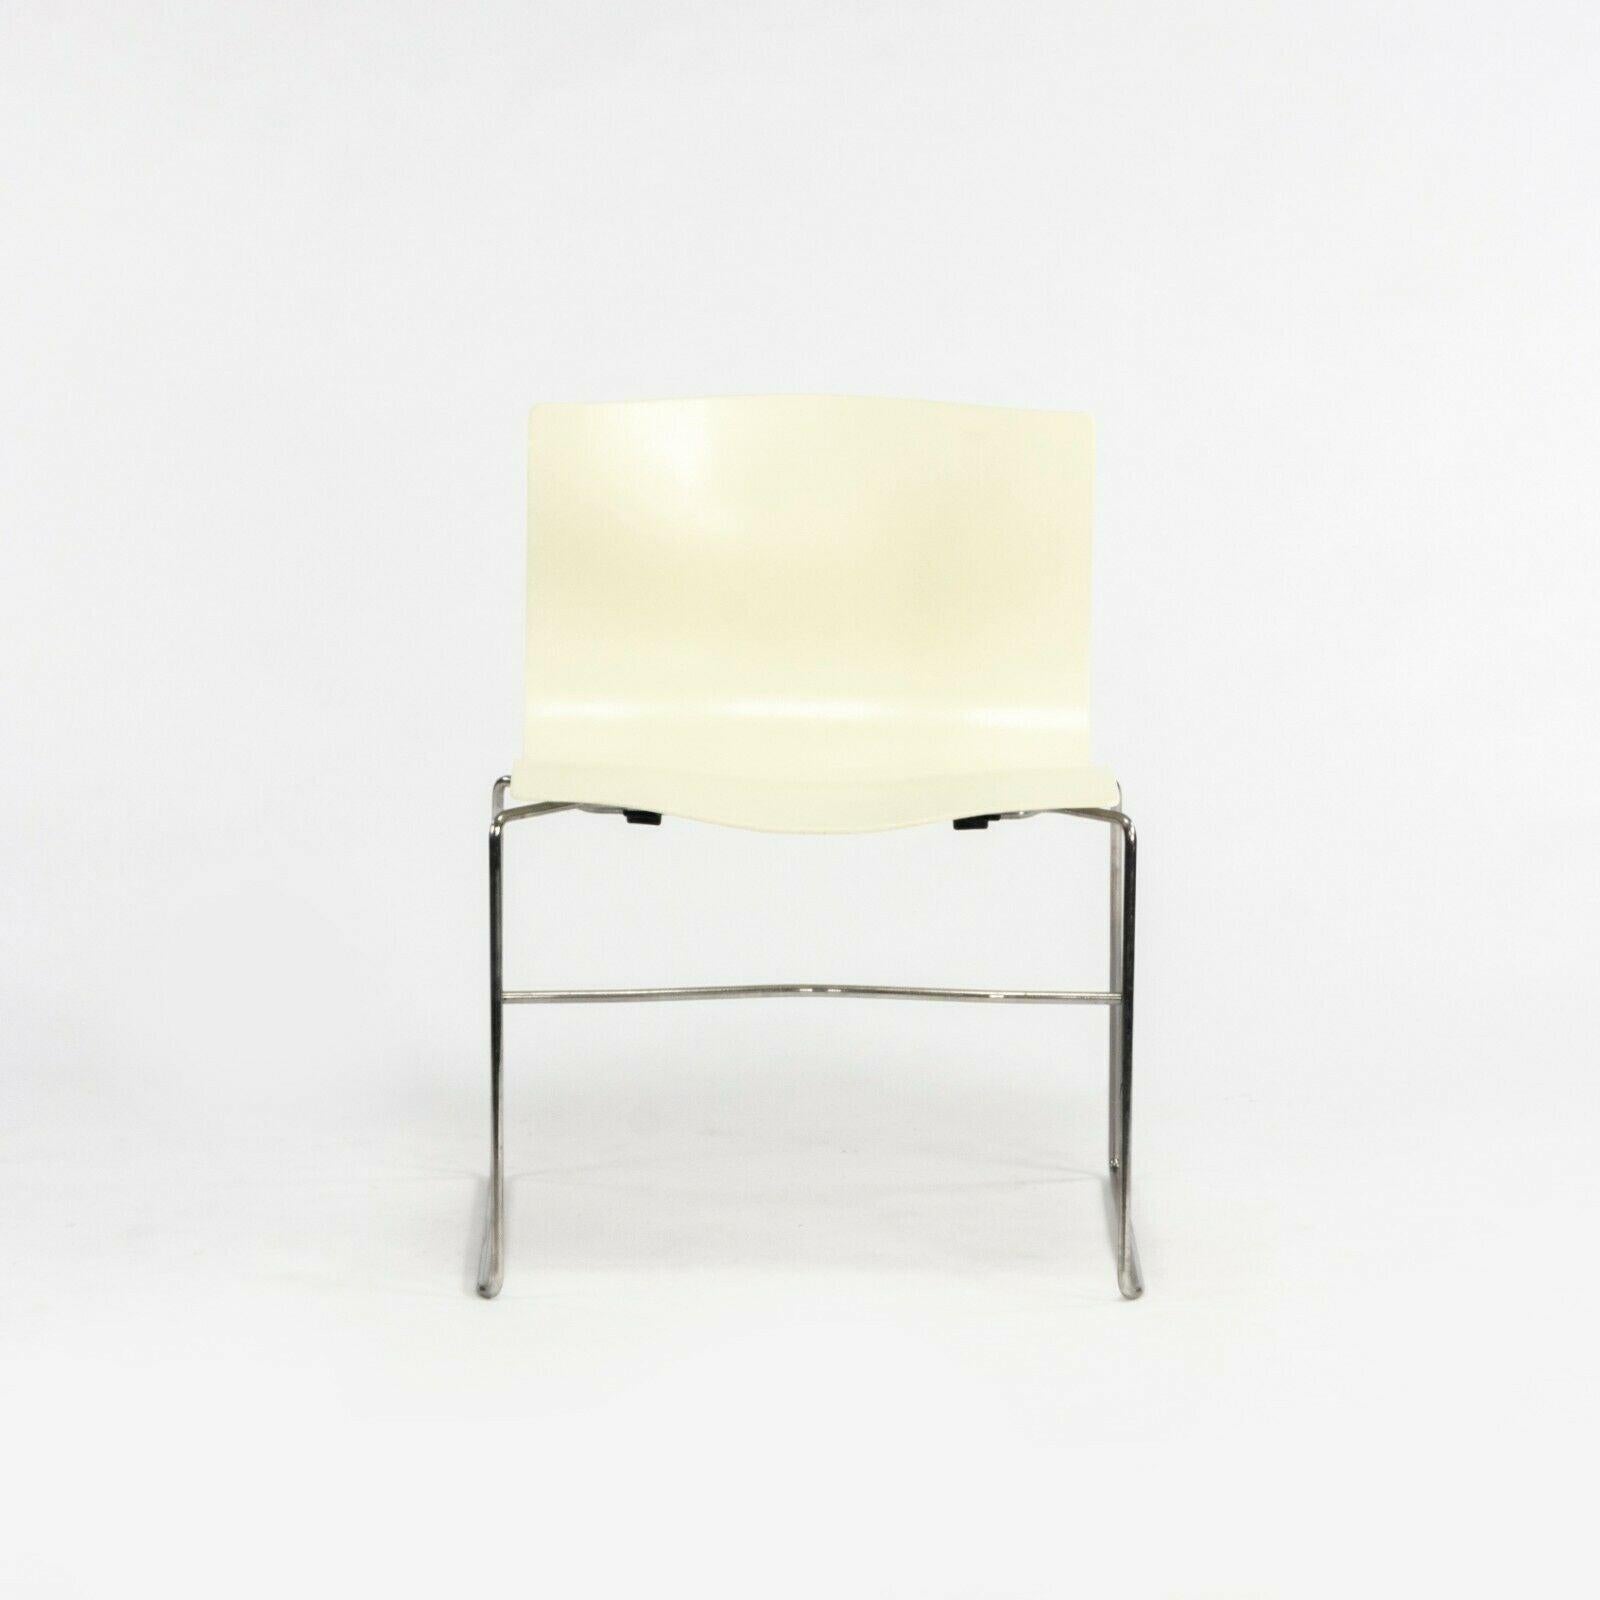 Listed for sale is a single (multiple available, but sold separately) Knoll Handkerchief stacking chair, designed by Lella and Massimo Vignelli. The duo were some of the most influential designers of the 20th century and are perhaps most famous for